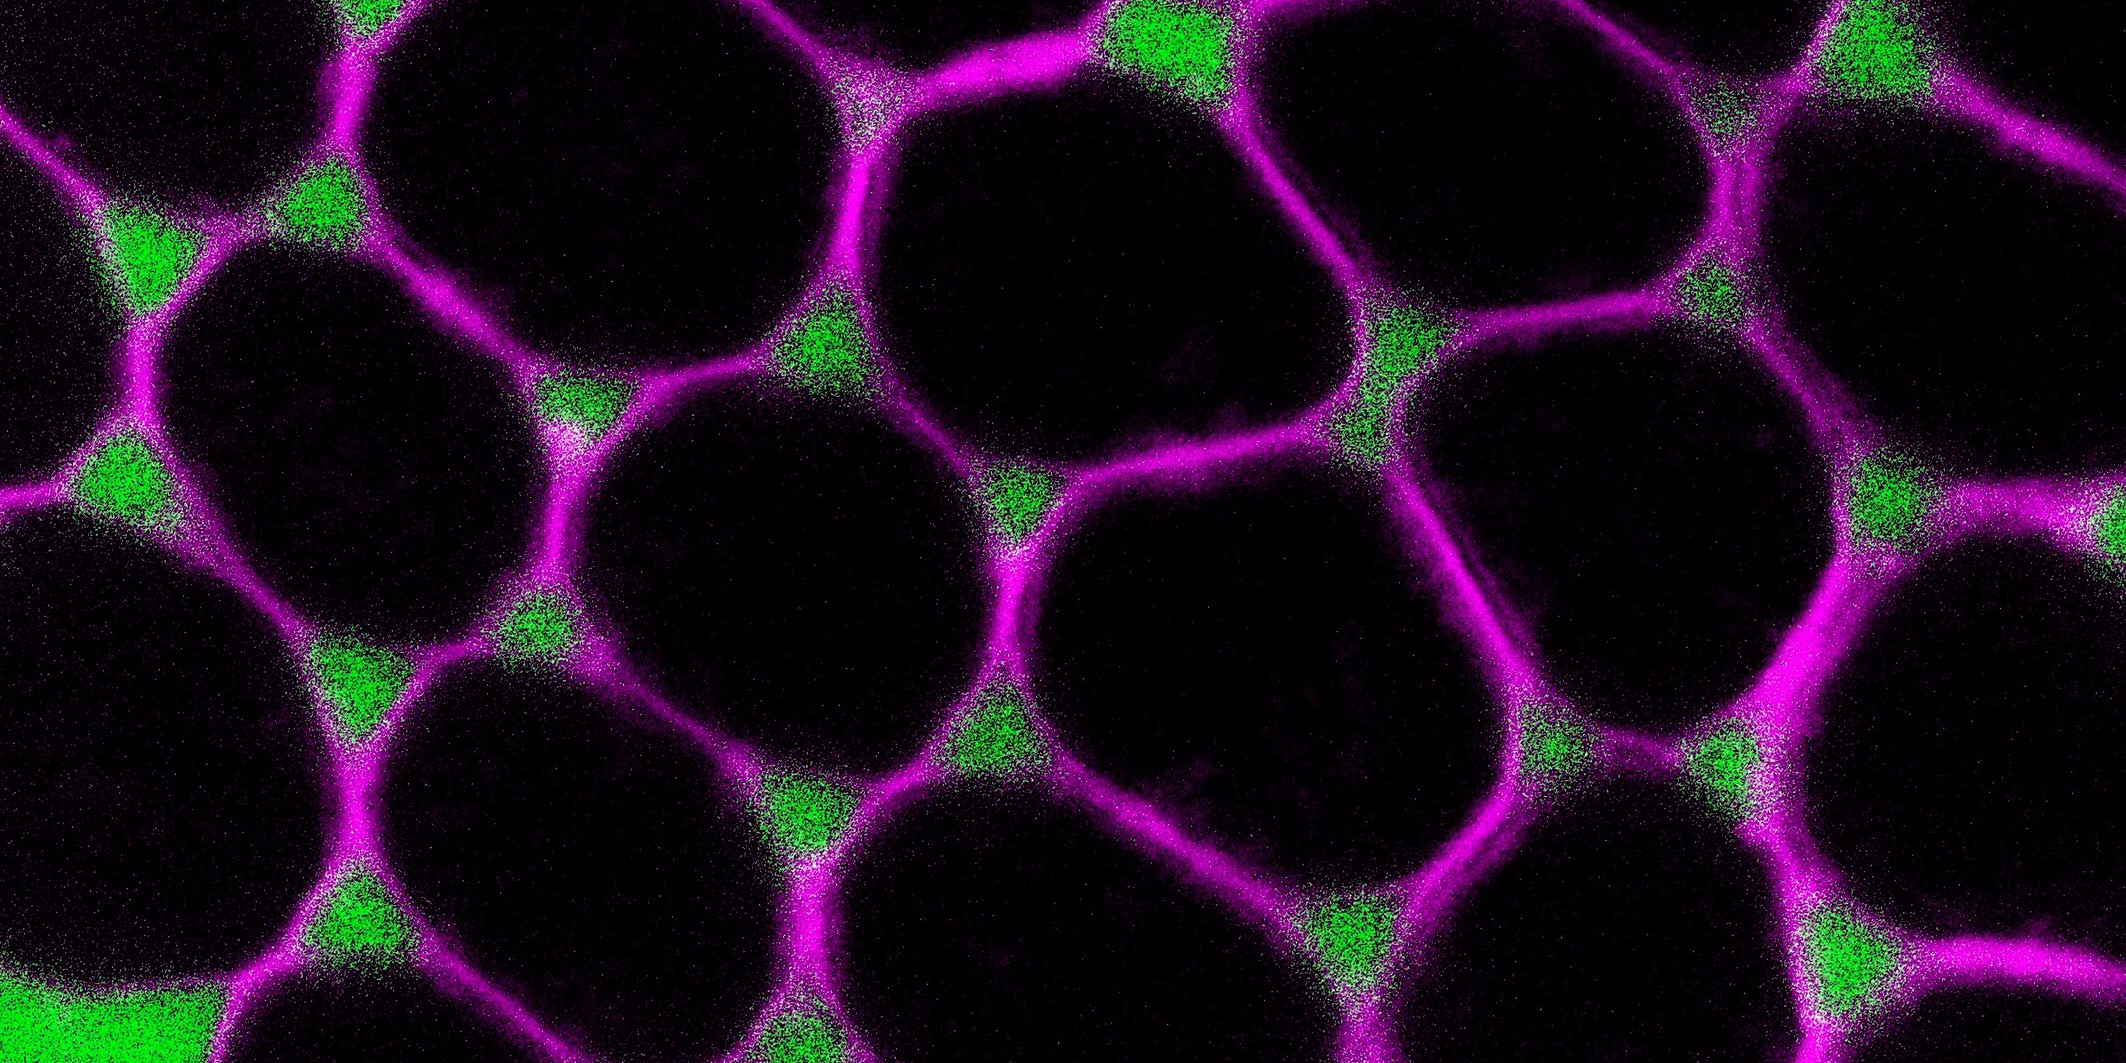 Junctions between three cells serve as gateways for the transport of substances